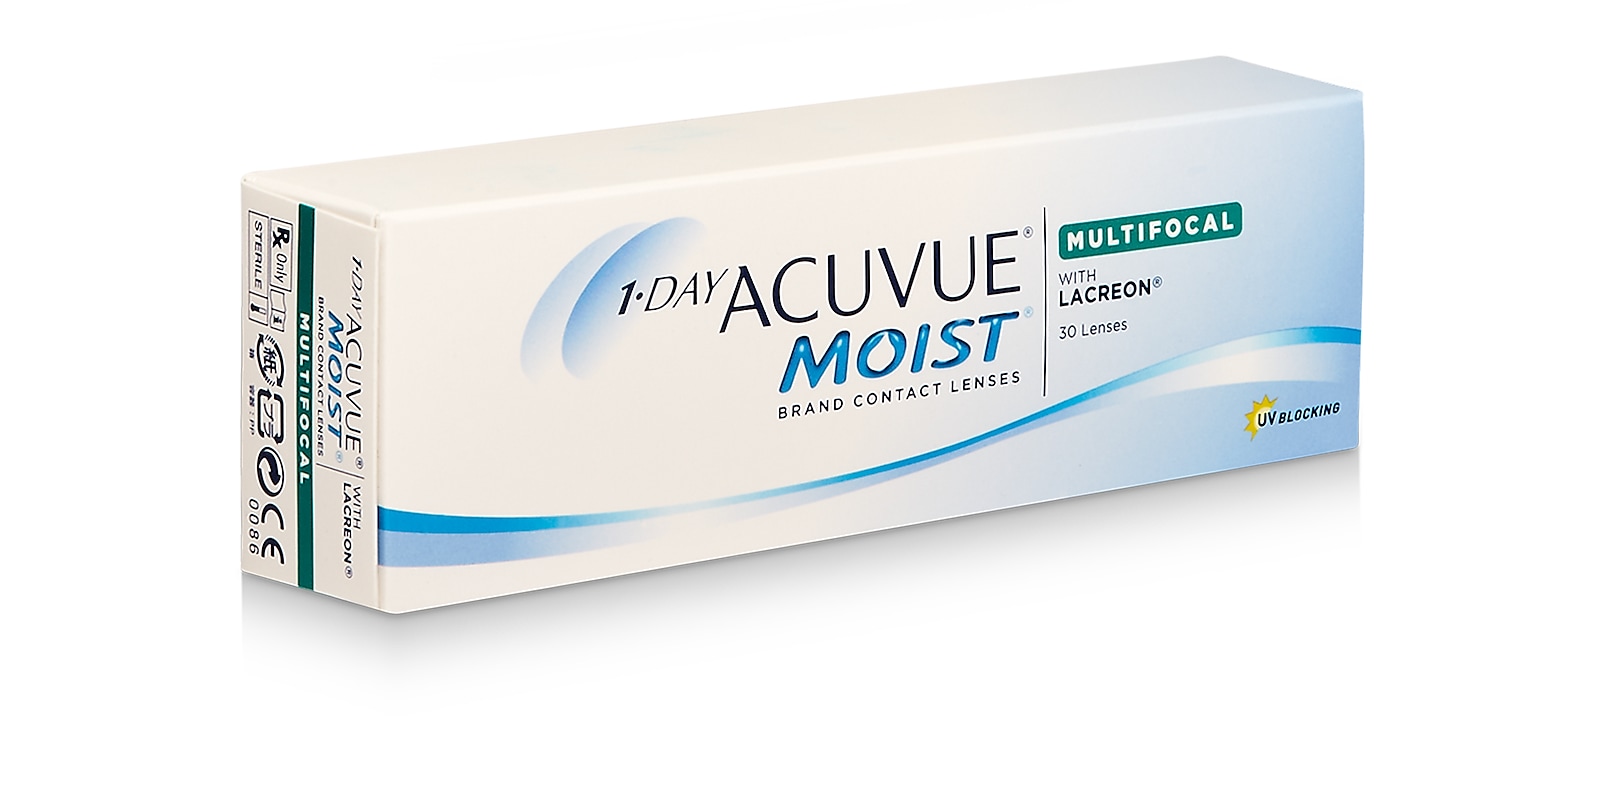 1-Day Acuvue® Moist Multifocal, 30 pack contact lenses